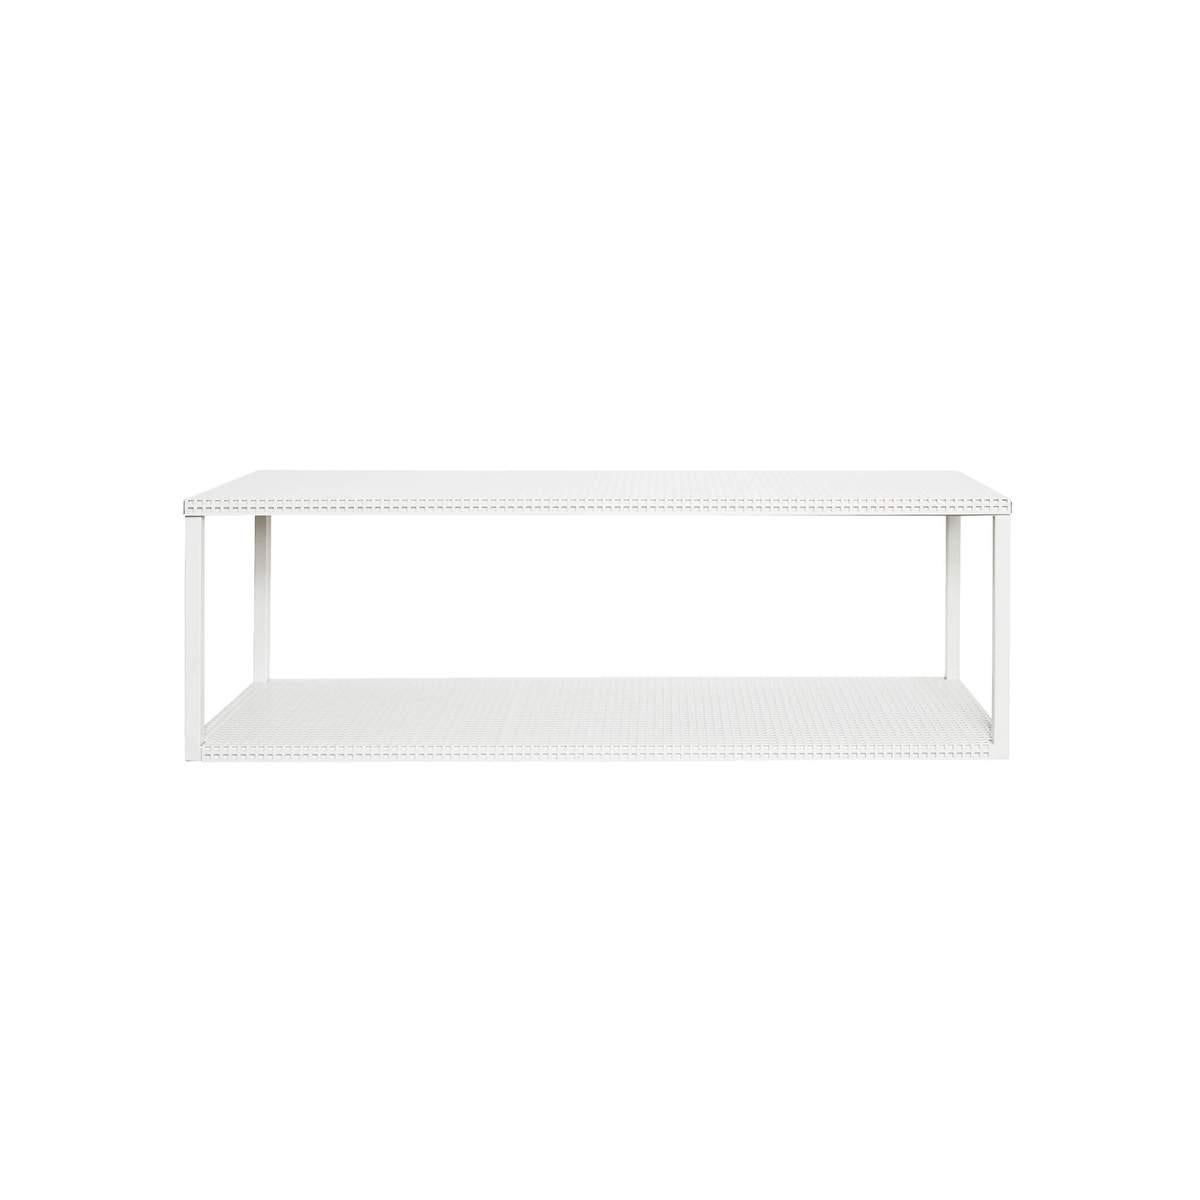 White Grid wall shelf by Kristina Dam Studio
Materials: White Powder-Coated Steel.
Also available in different colors. 
Dimensions: 25 x 75 x h 25cm.

The Modernist furniture collection takes notions of modern design and yet the distinctive